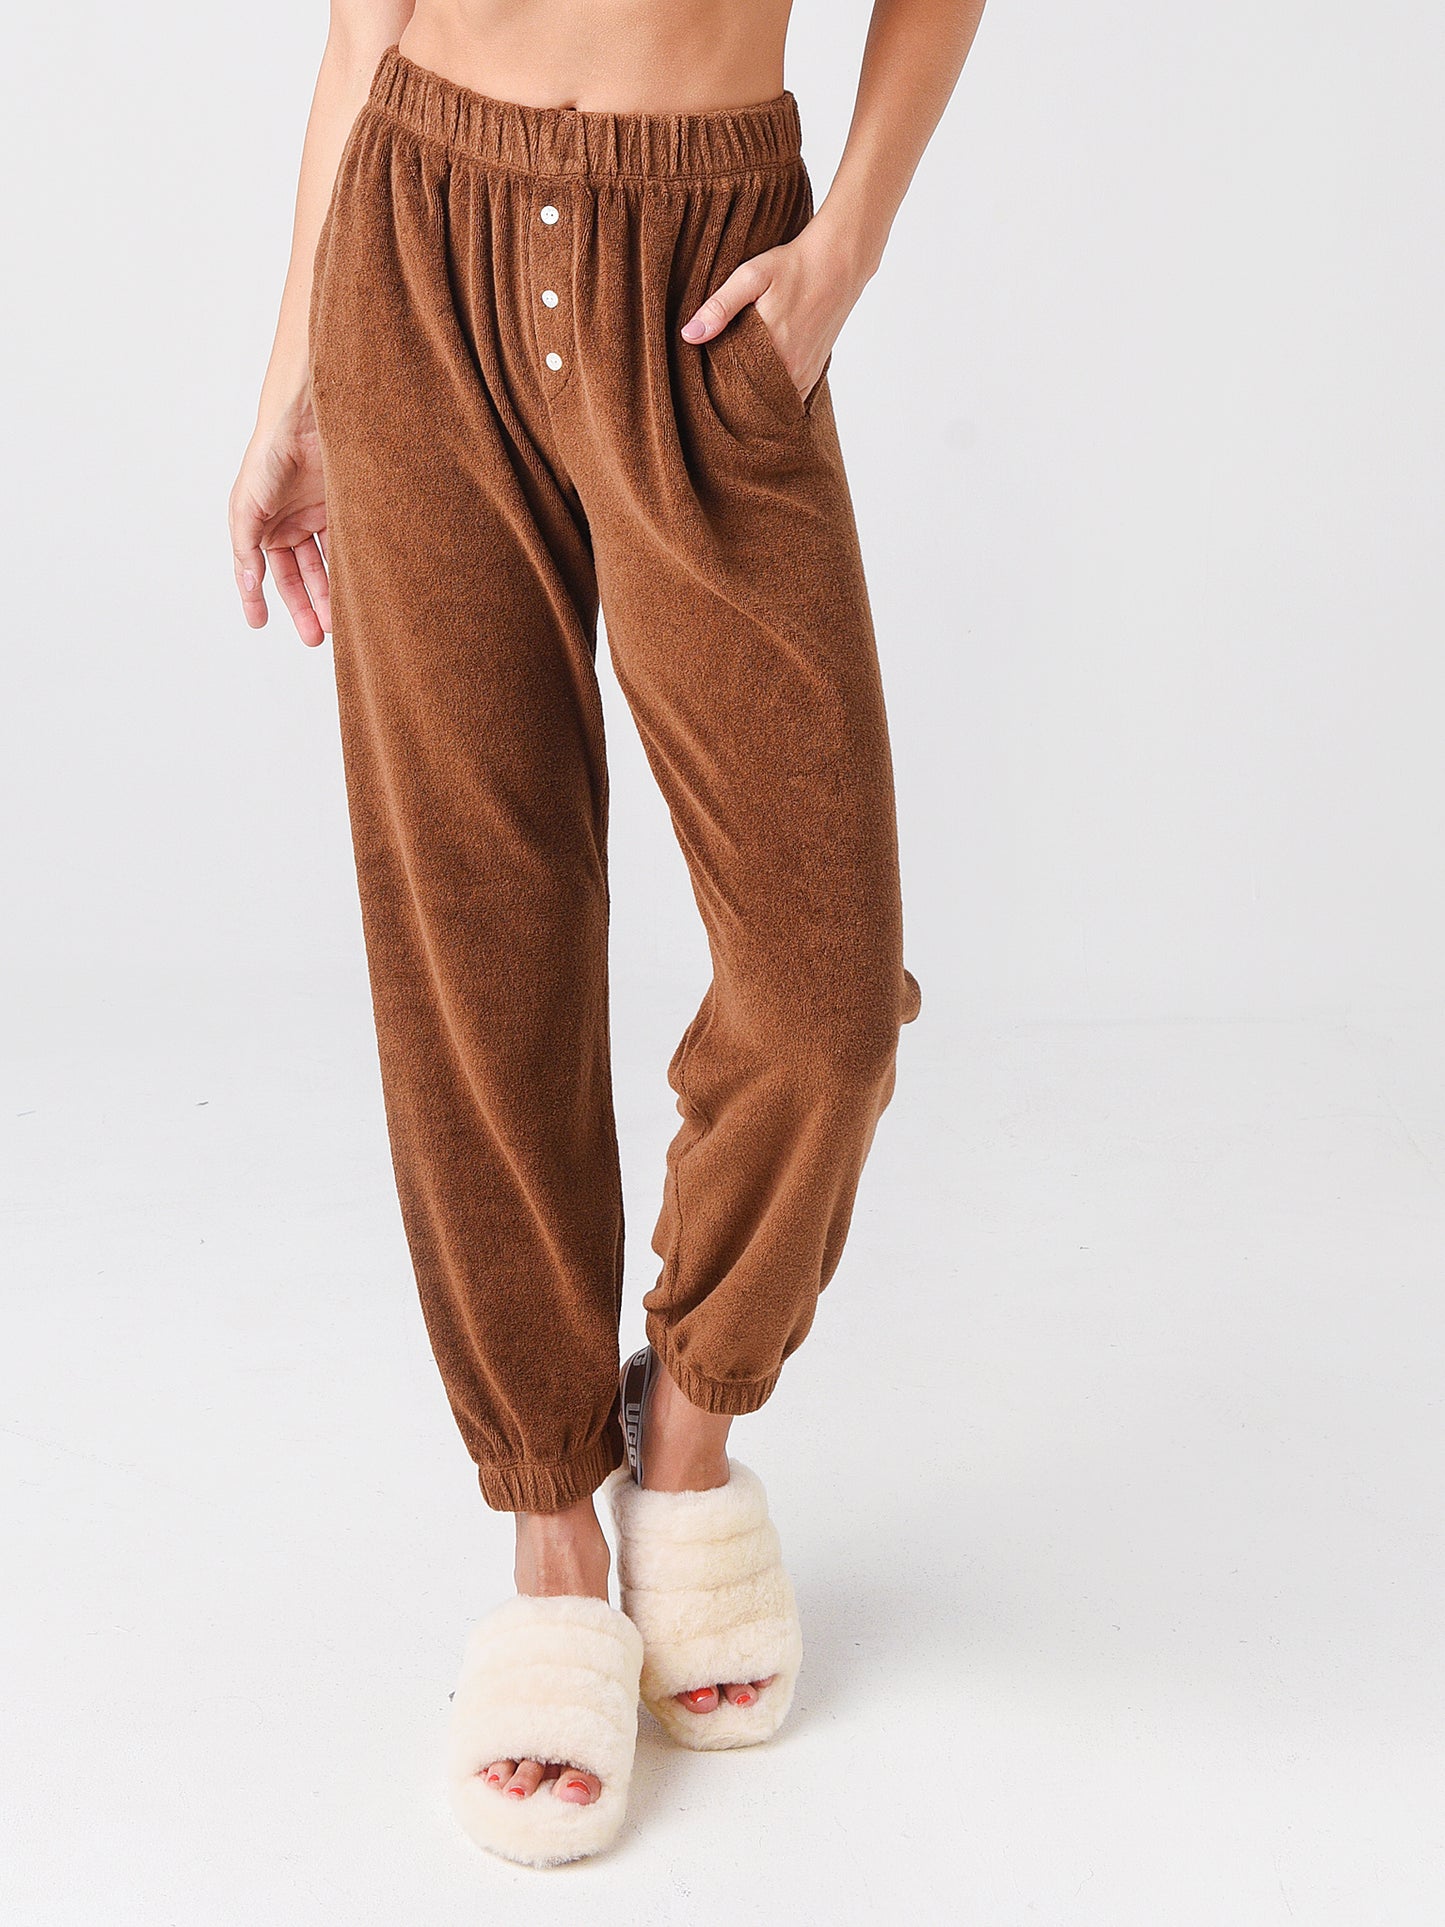 DONNI. Women's The Terry Henley Sweatpant.